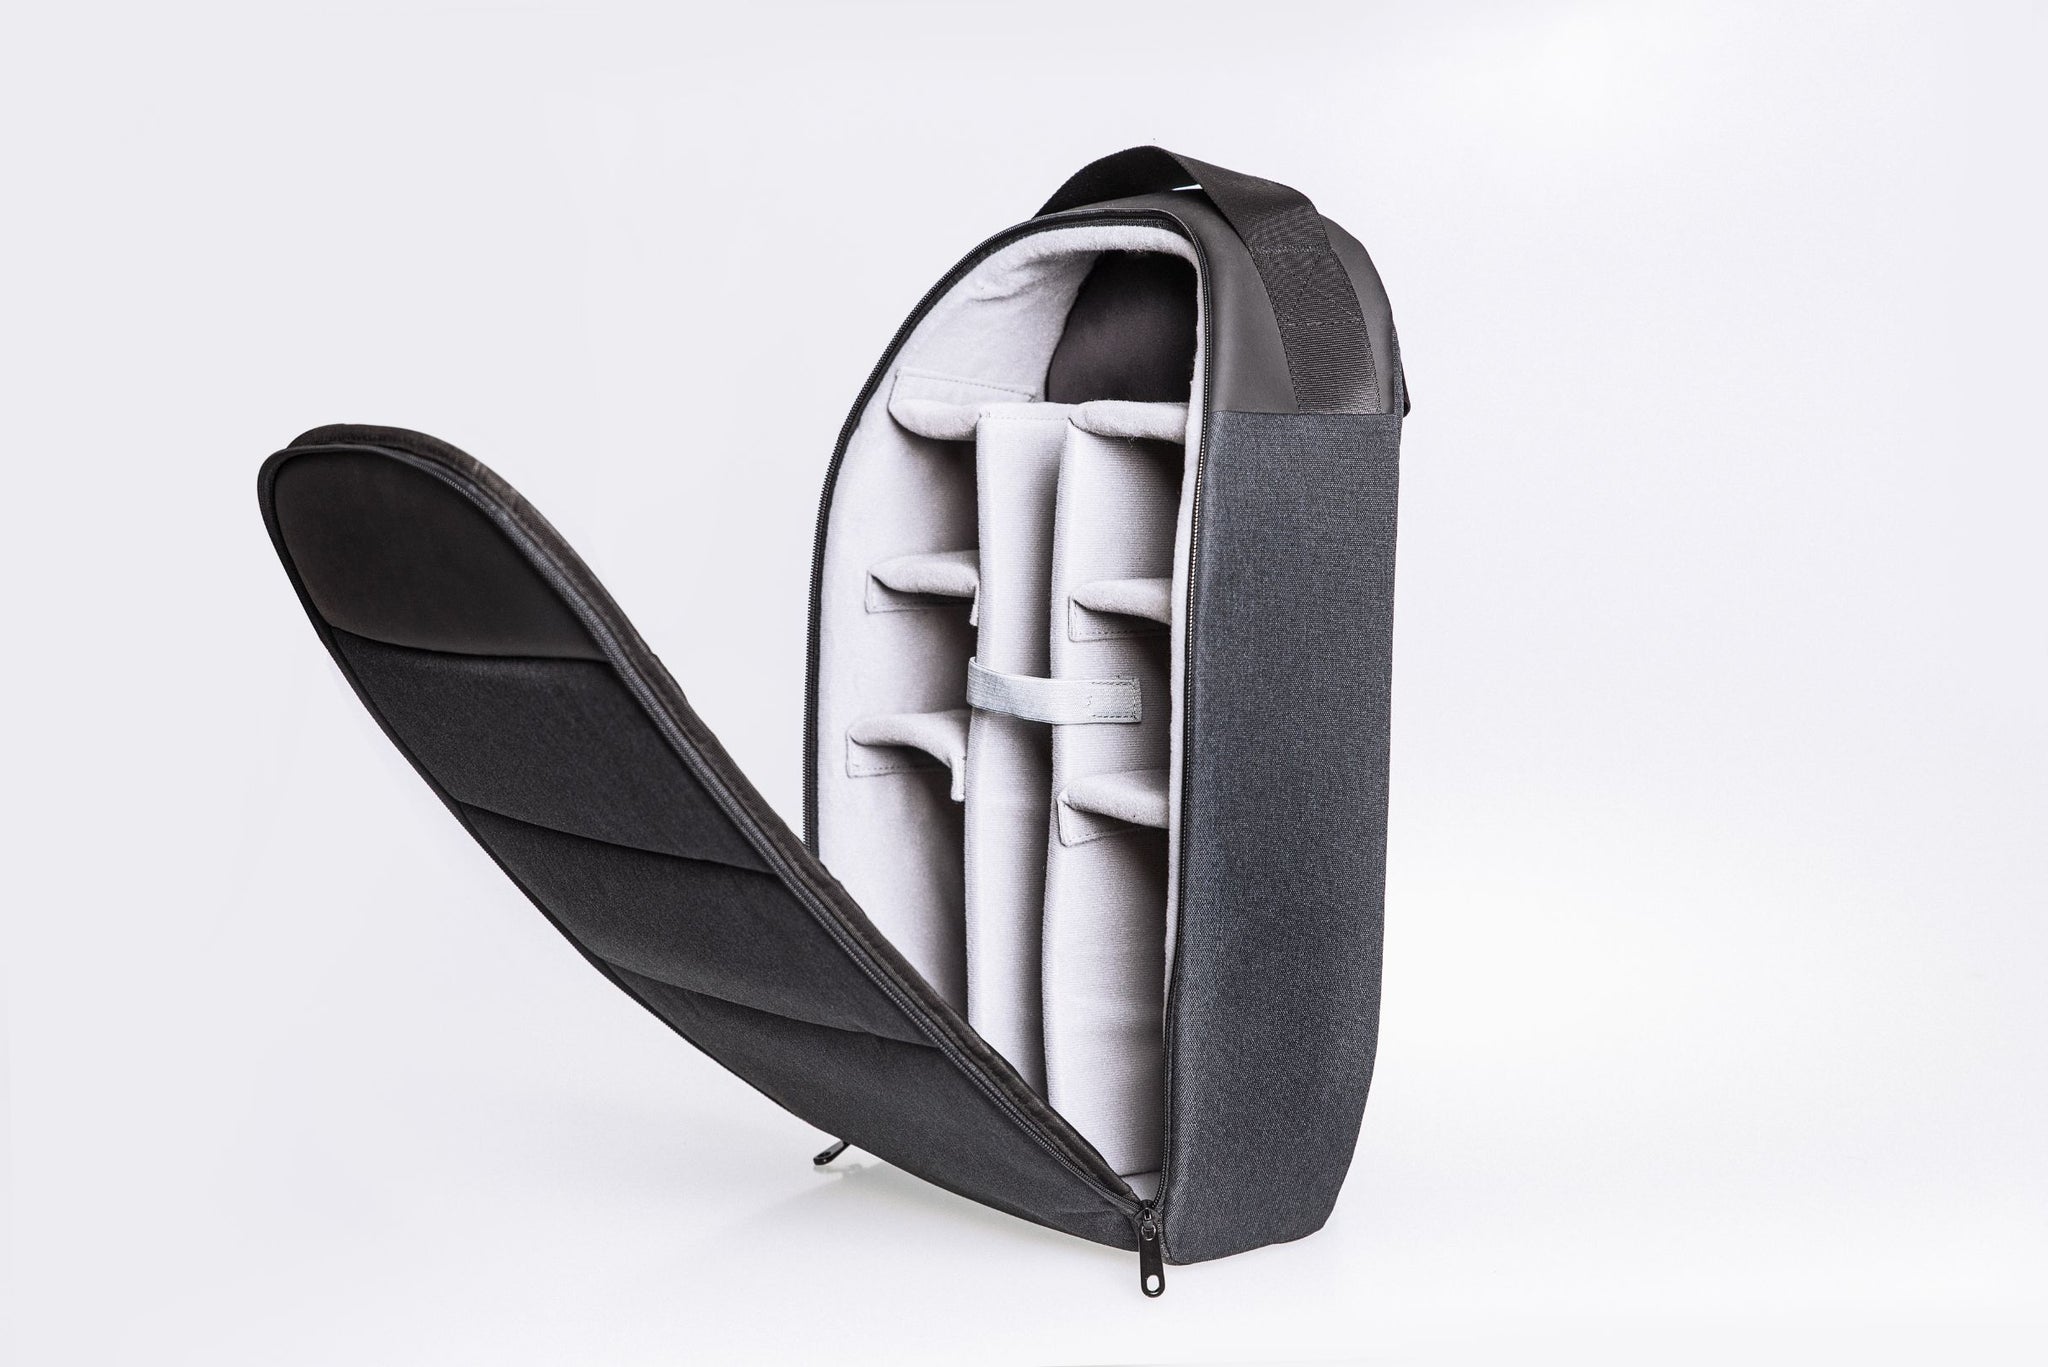 Izzy Bag - the smartest and most flexible organizer bag ever